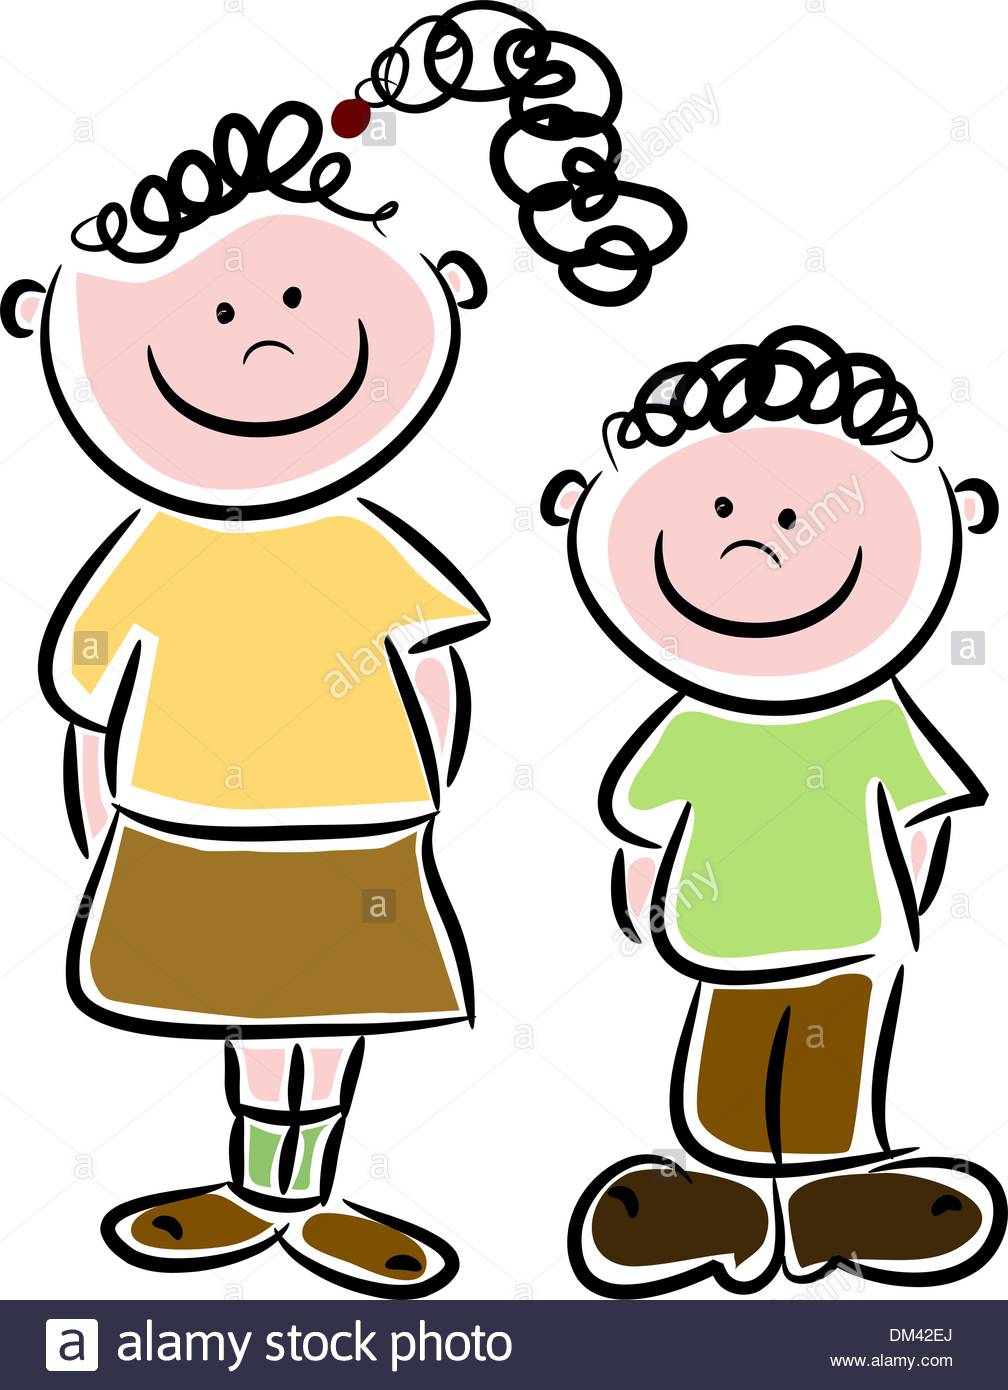 brothers clipart little brother